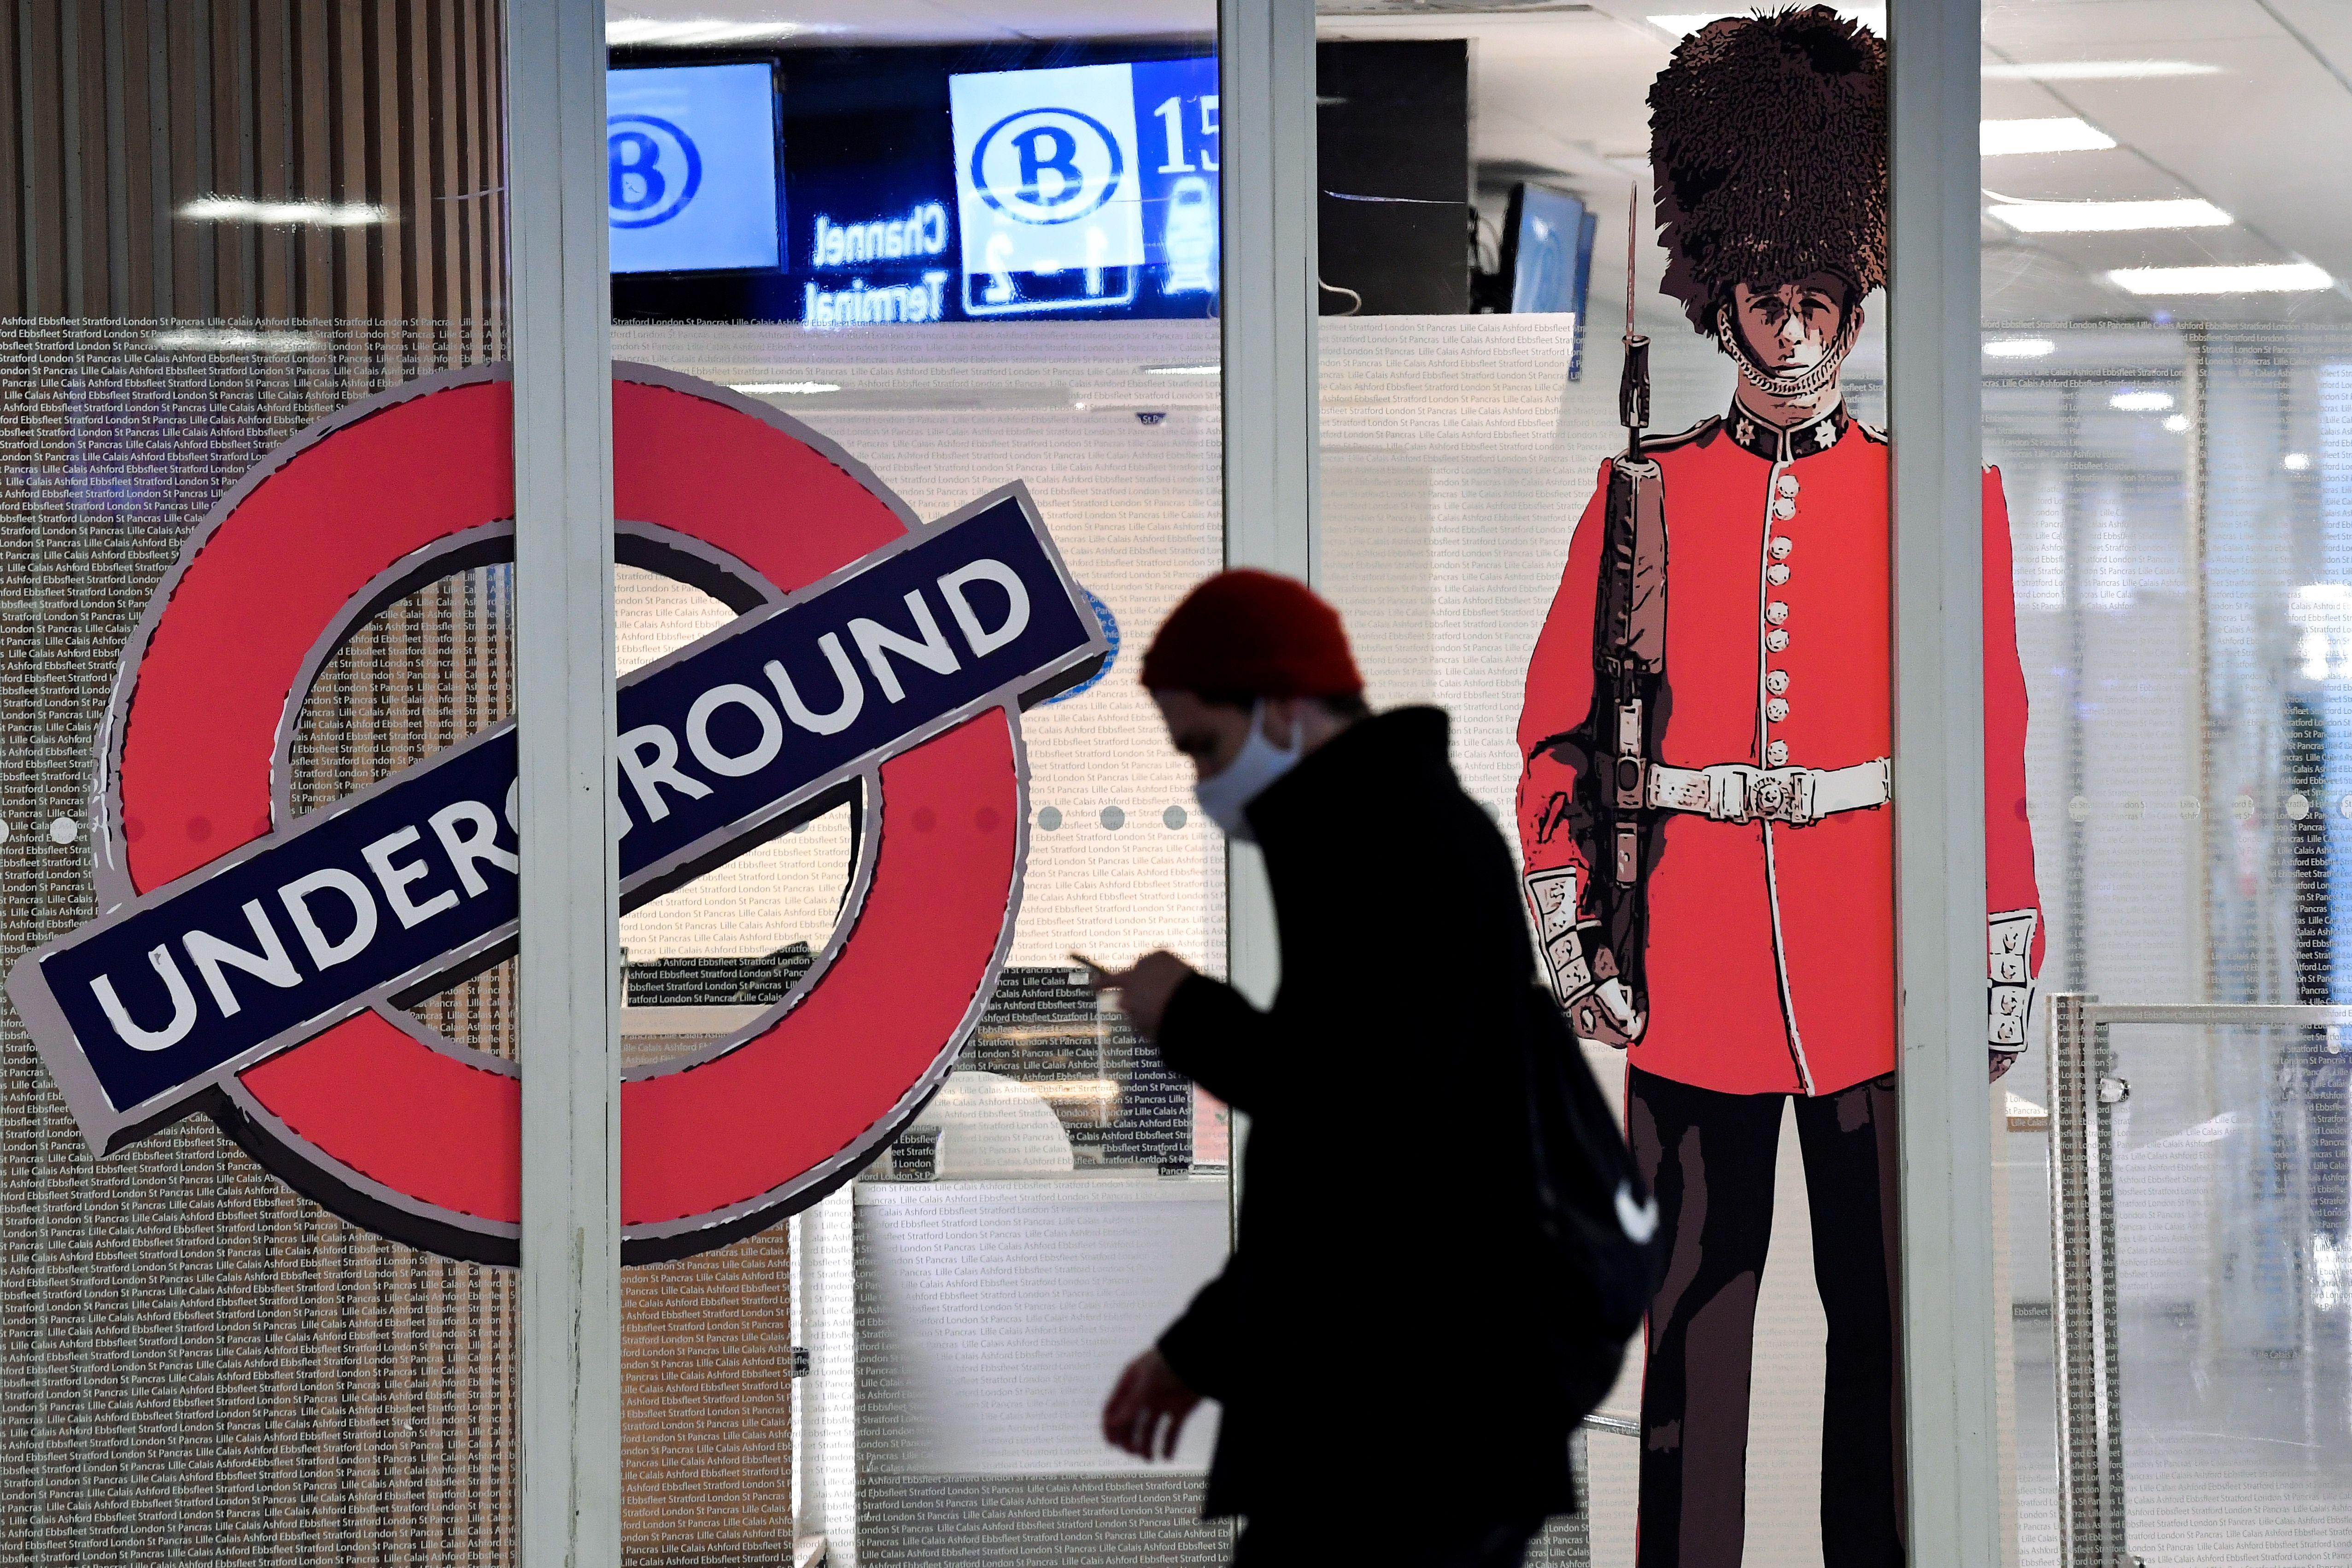 A person wearing a mask and looking at their phone walks past a London Underground sign and a Queen's Guard standee at the closed entrance of the Eurostar terminal at Brussels South railway station.